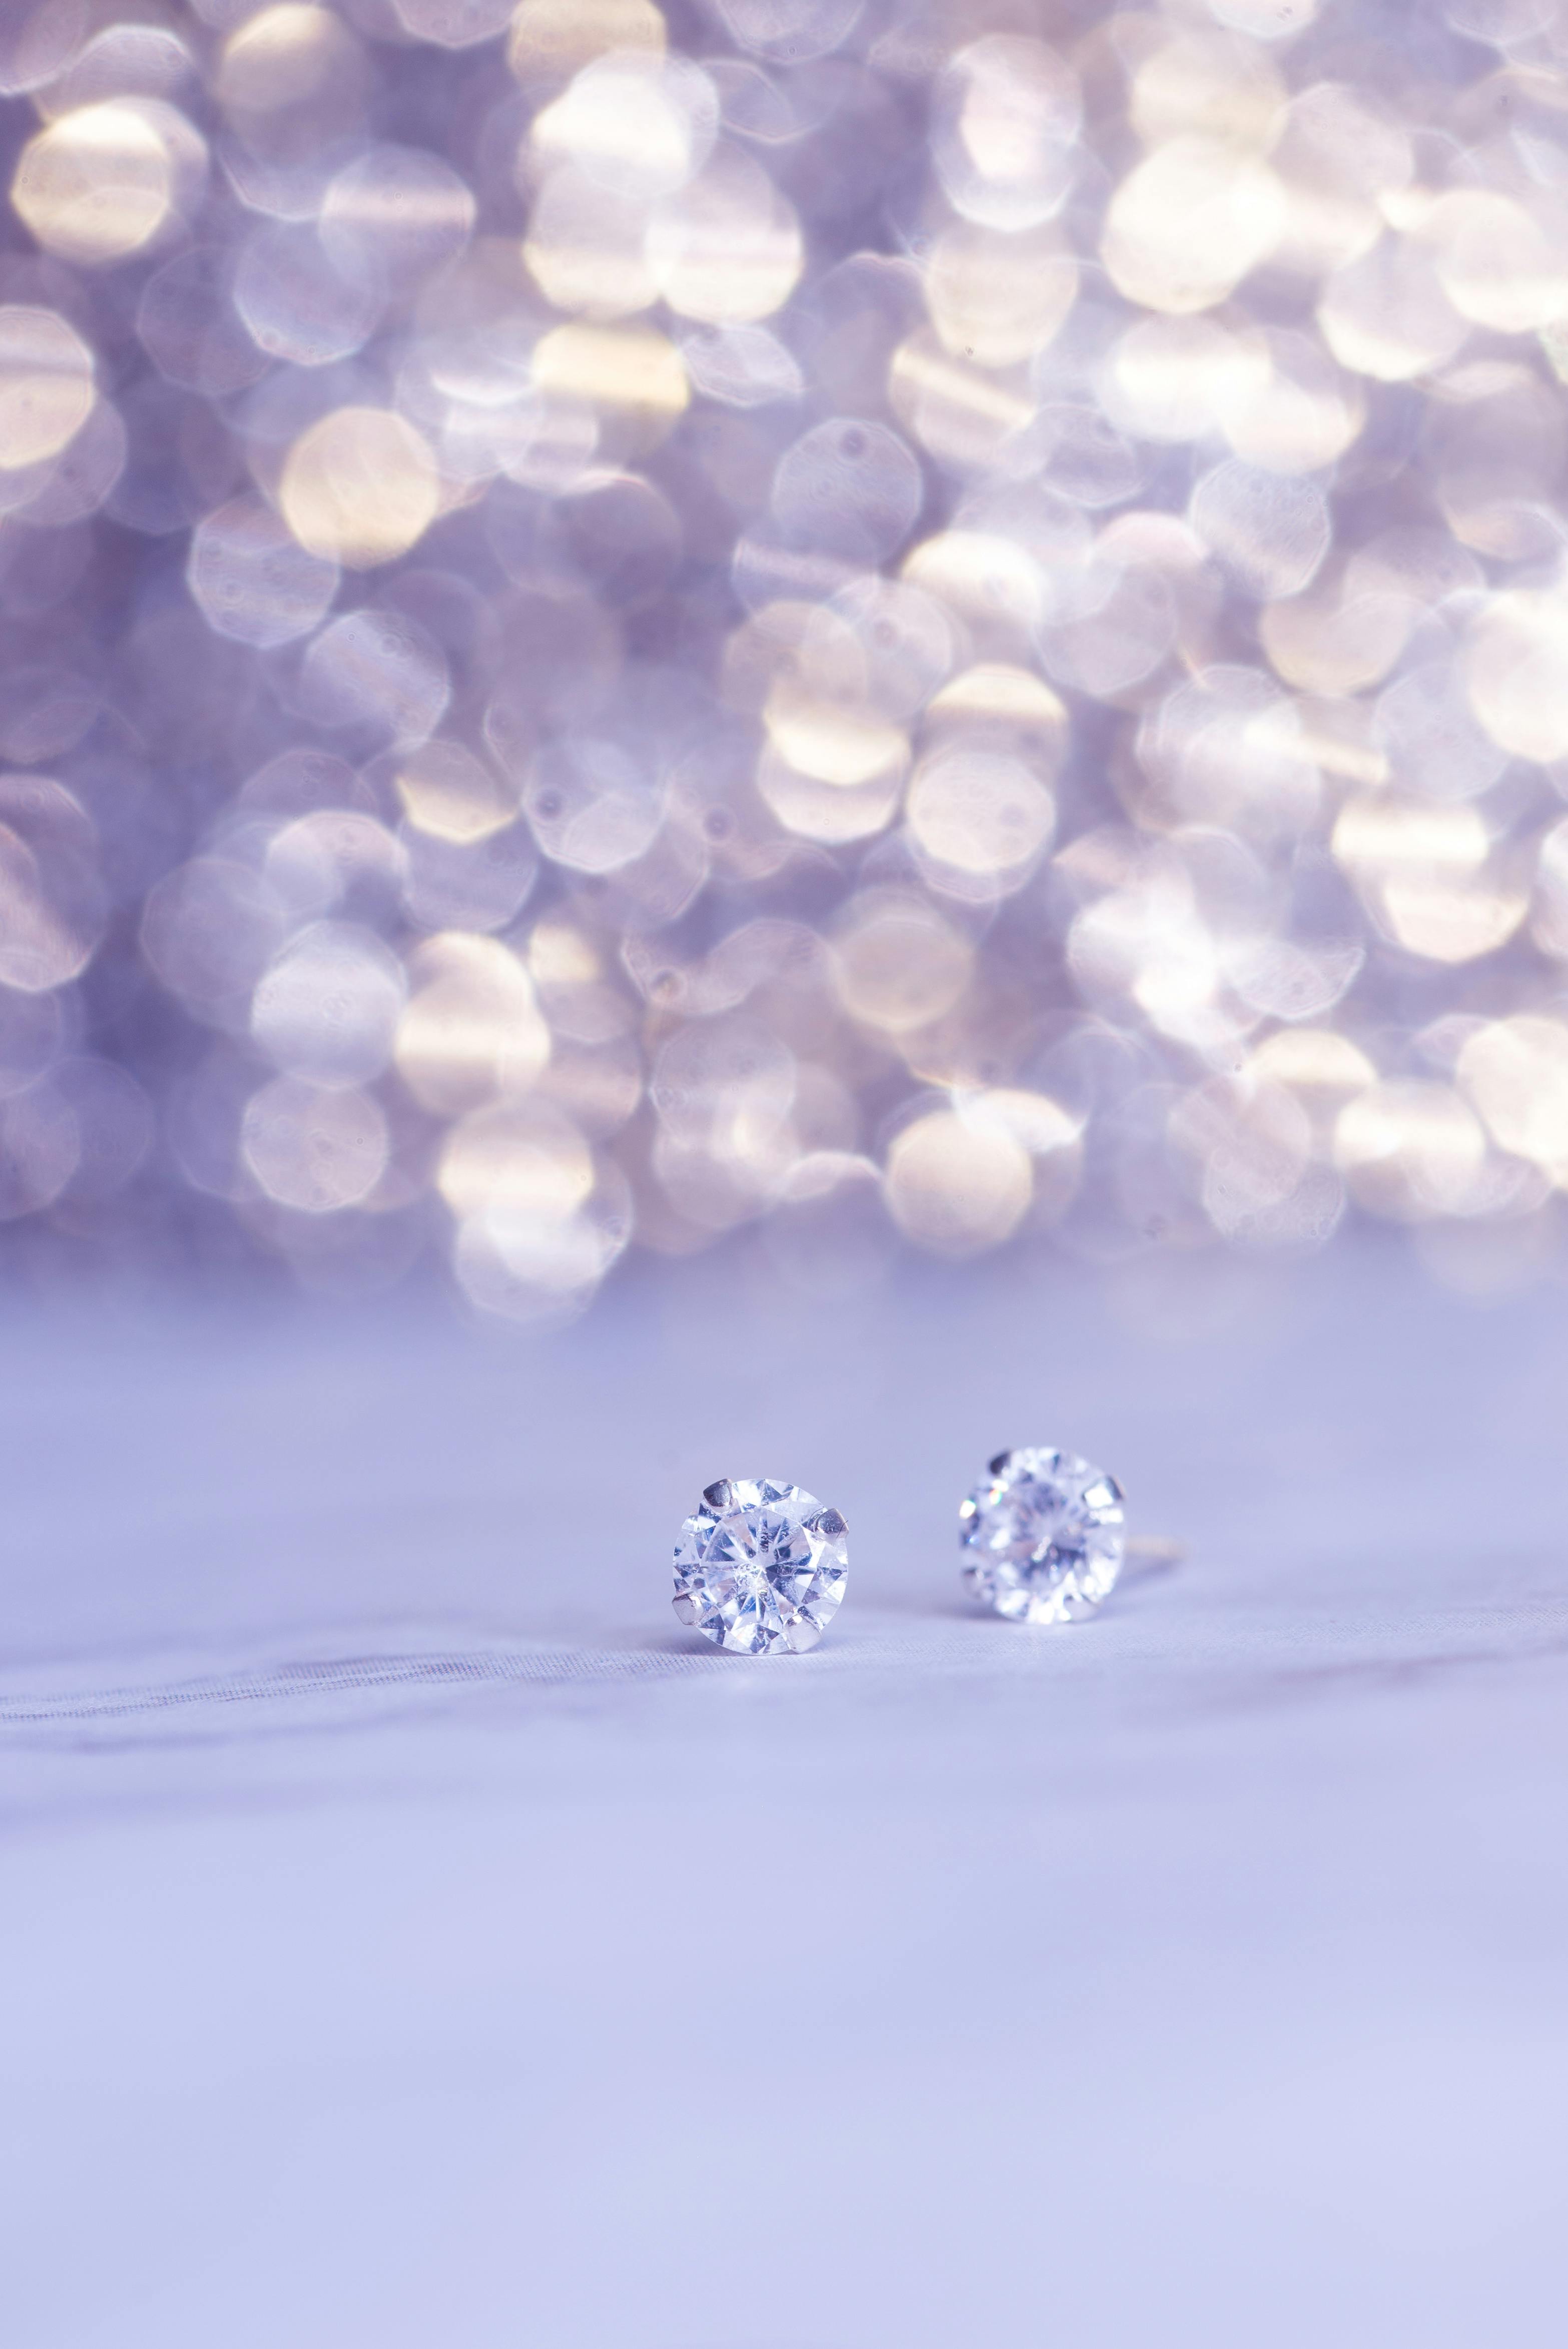 Diamond Background Photos, Download The BEST Free Diamond Background Stock  Photos & HD Images